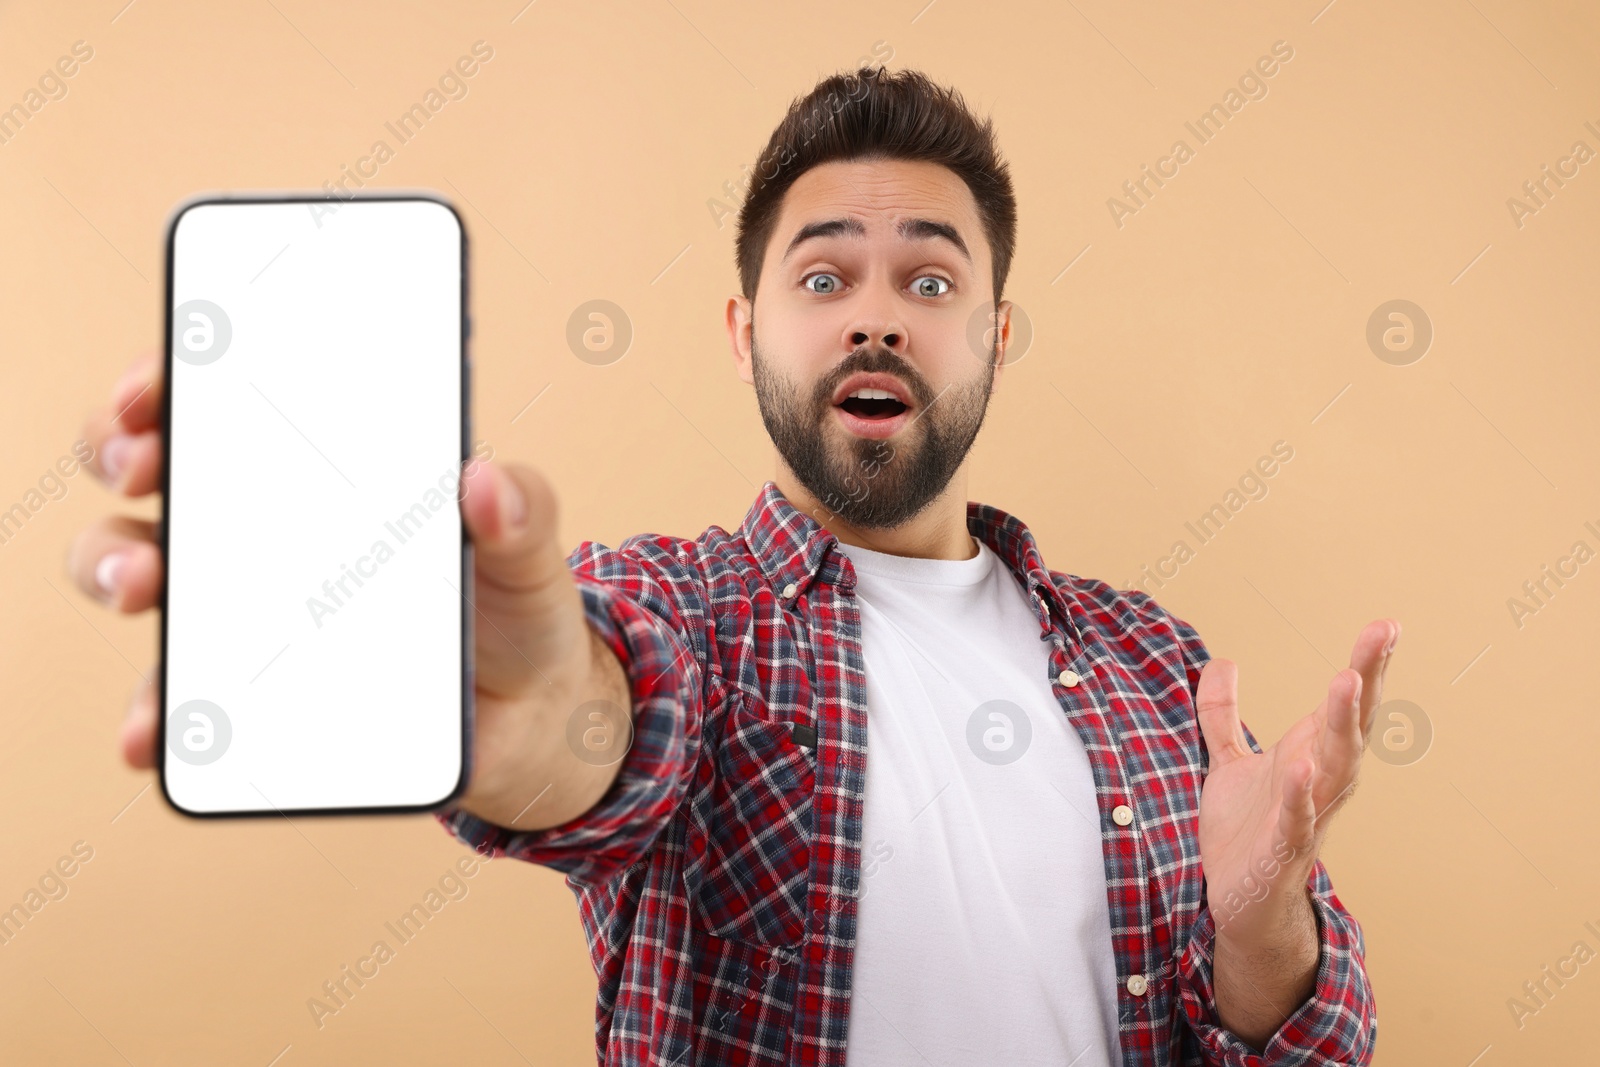 Photo of Surprised man showing smartphone in hand on beige background